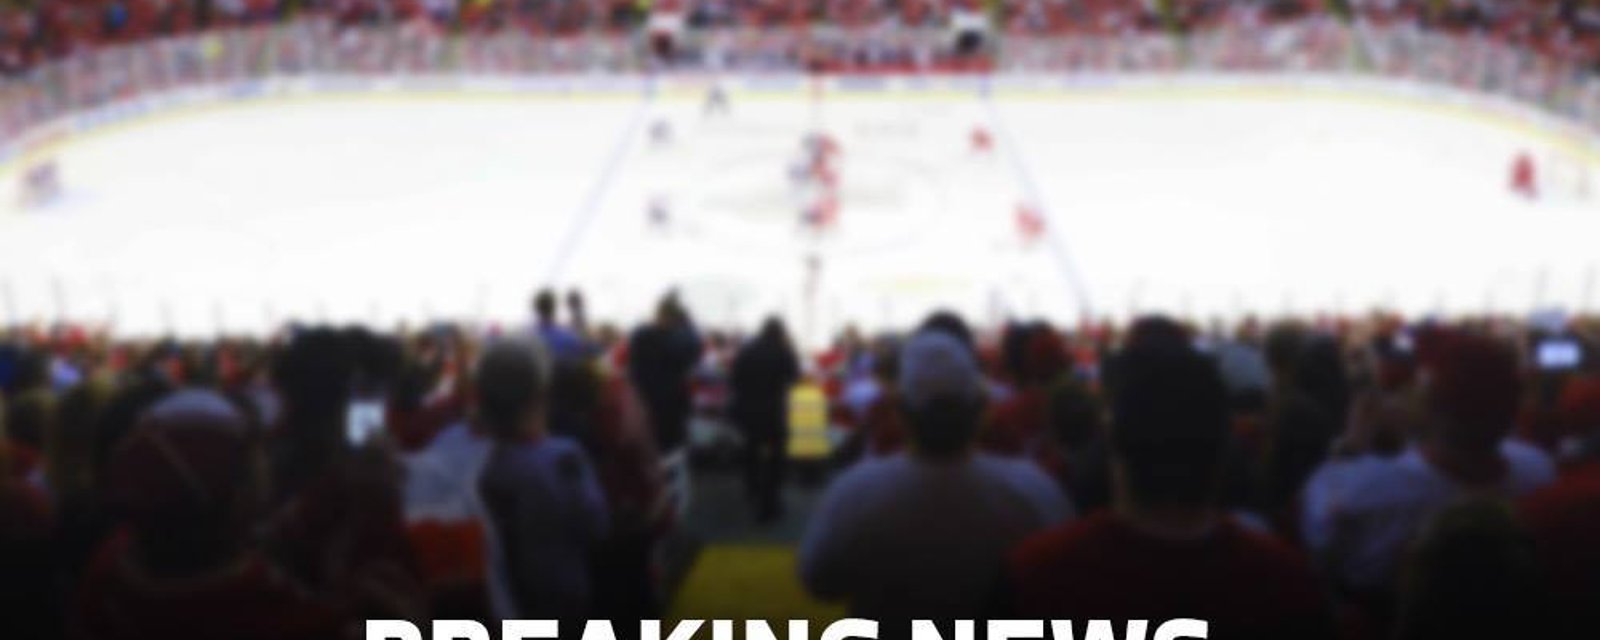 Breaking: NHL fan sexually assaulted at NHL playoff game.